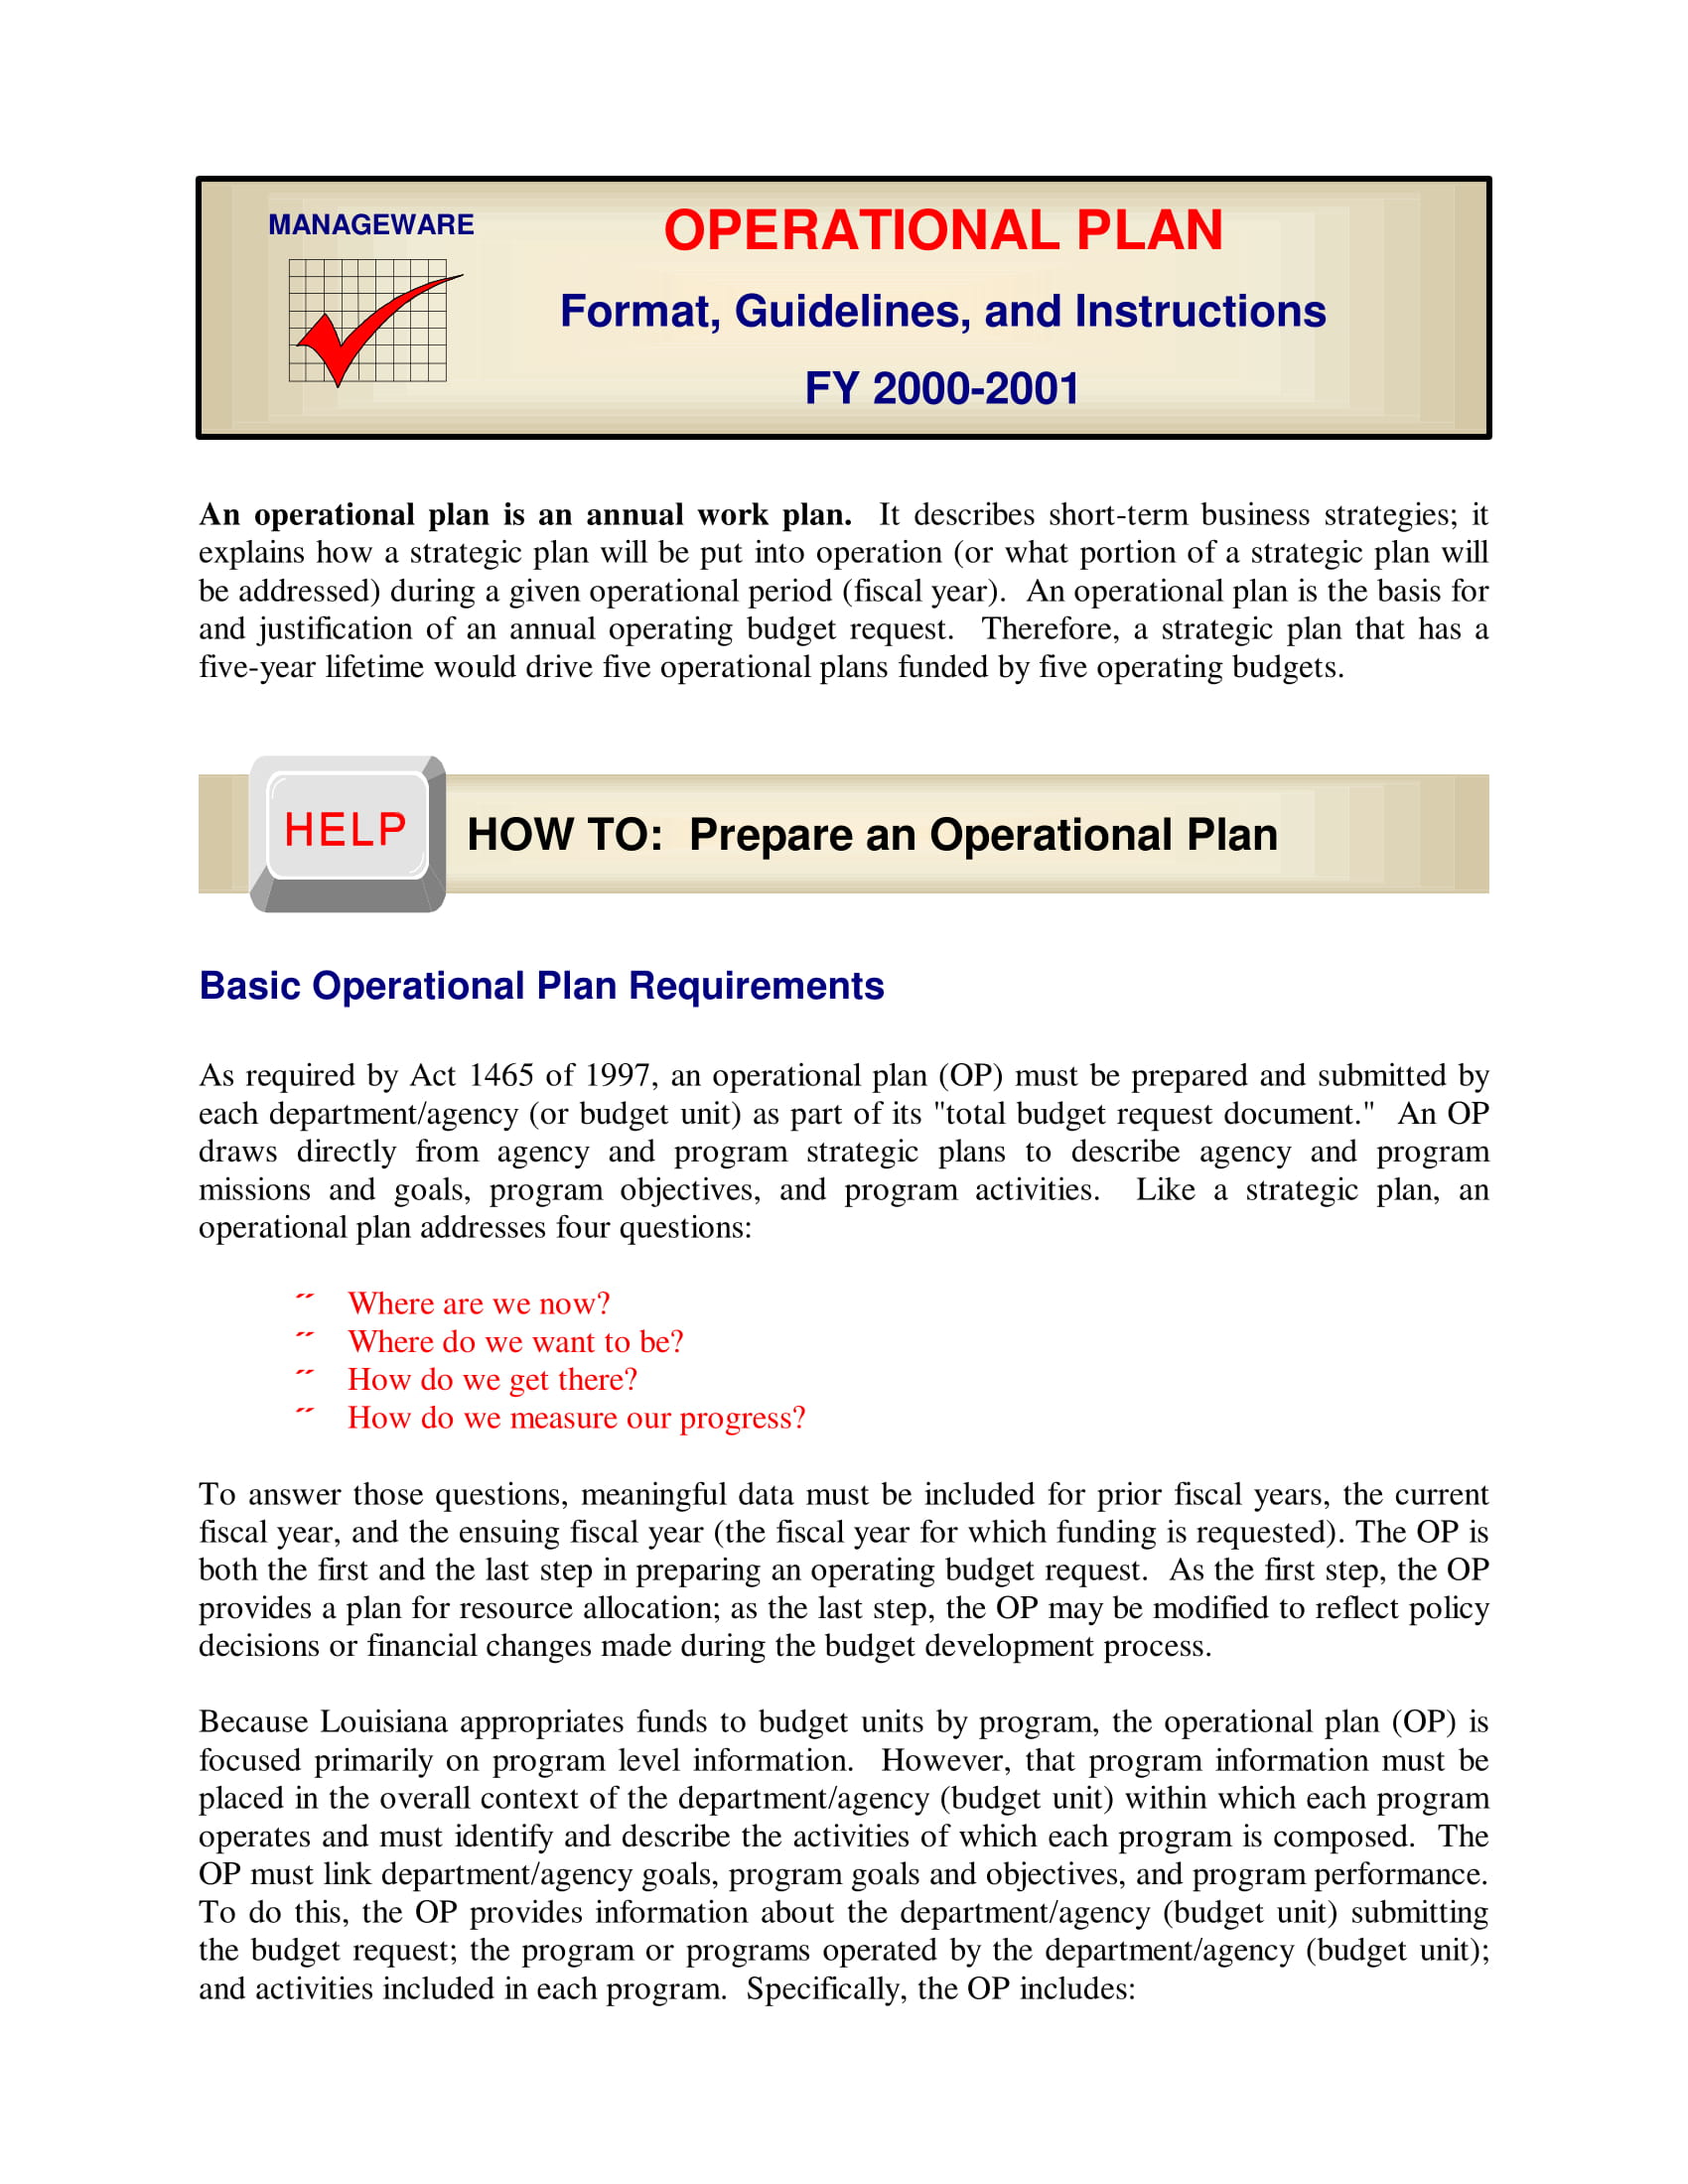 operational plan and management strategies format and guide example 01